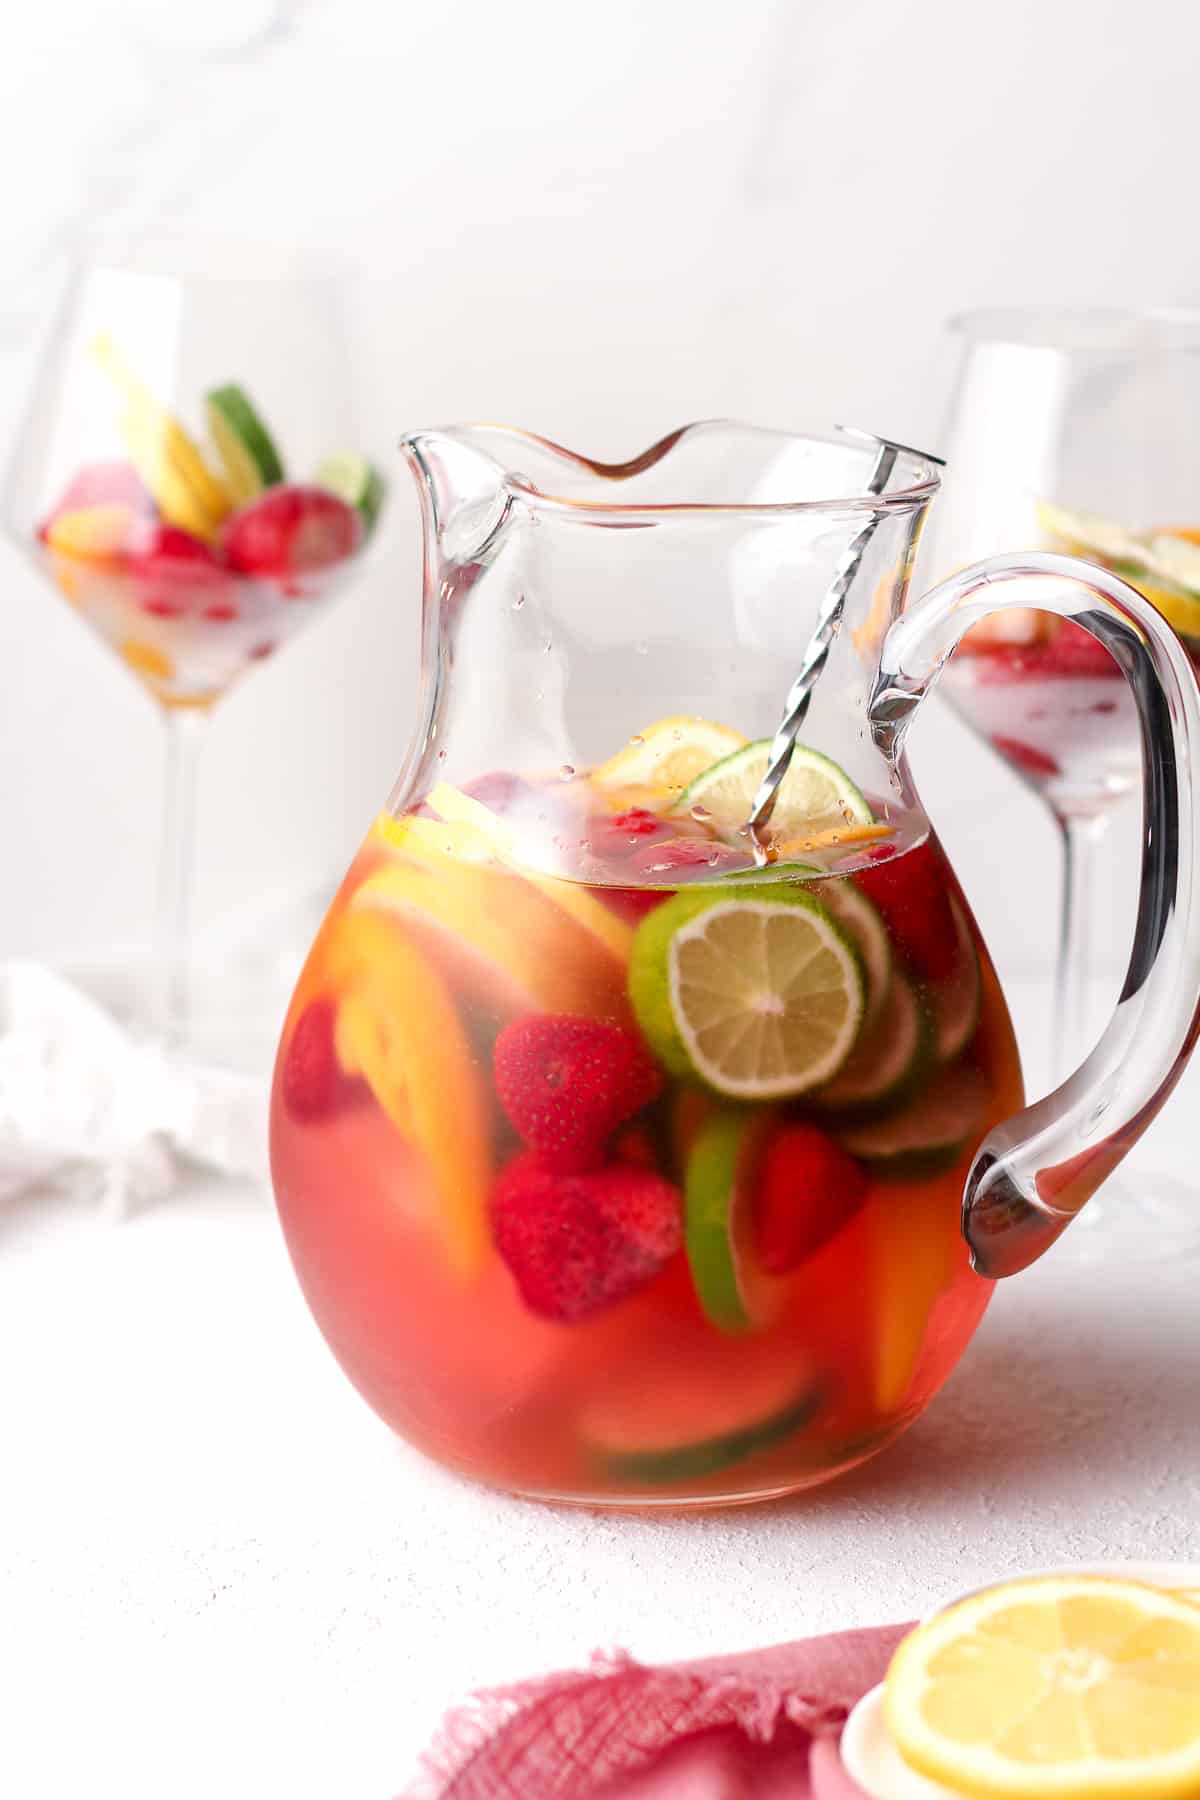 Side view of a pitcher of sangria, with sliced lemons, limes, and frozen strawberries.